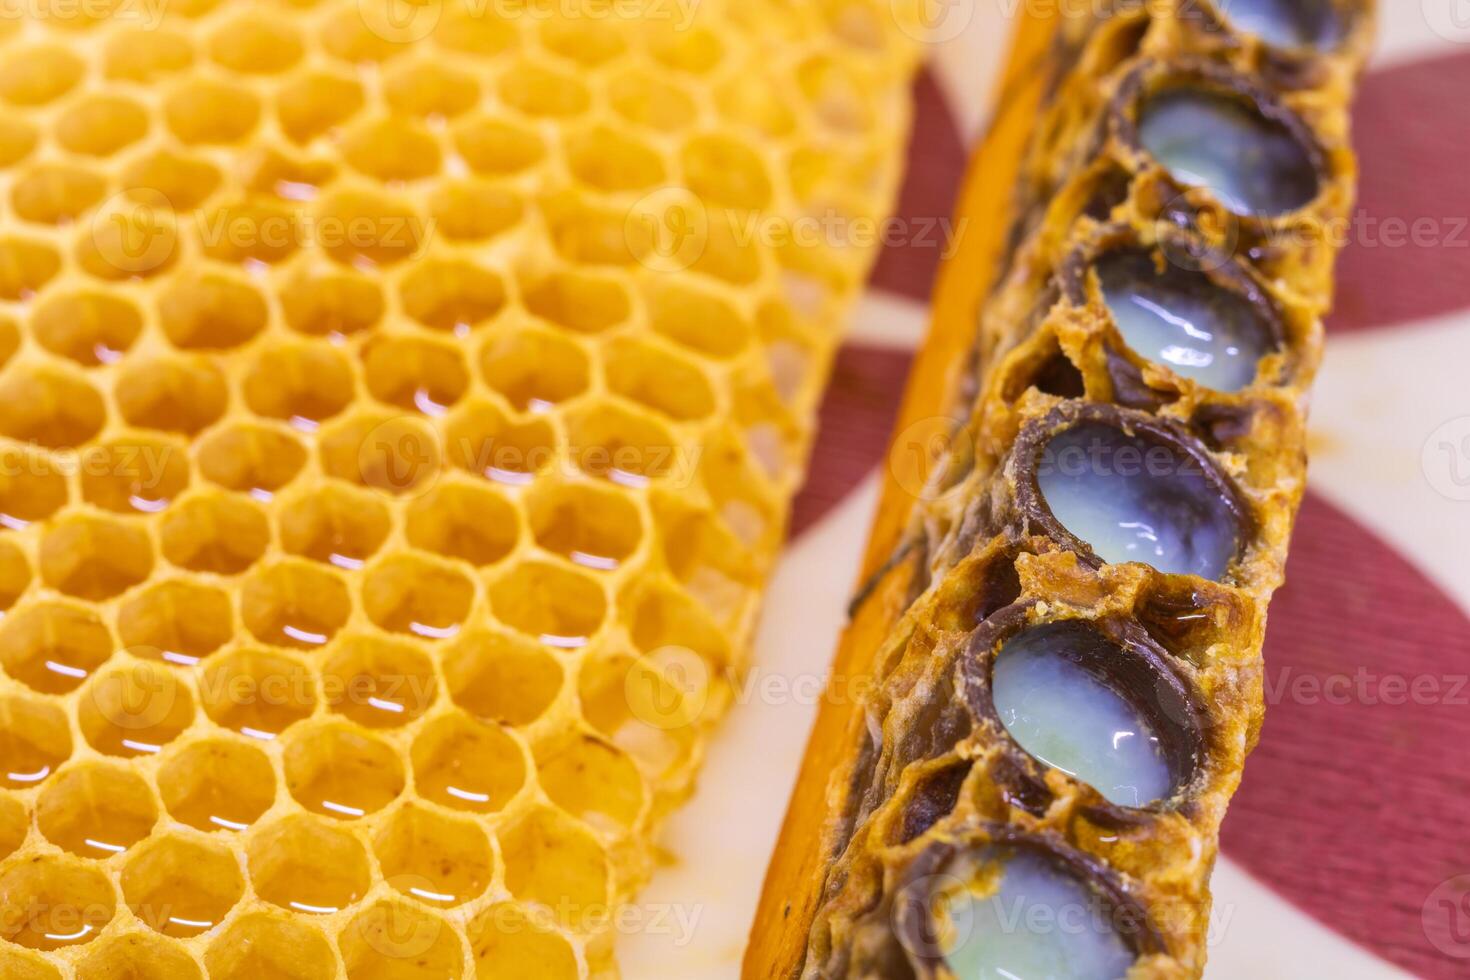 Queen bee cells full with royal jelly in focus. photo